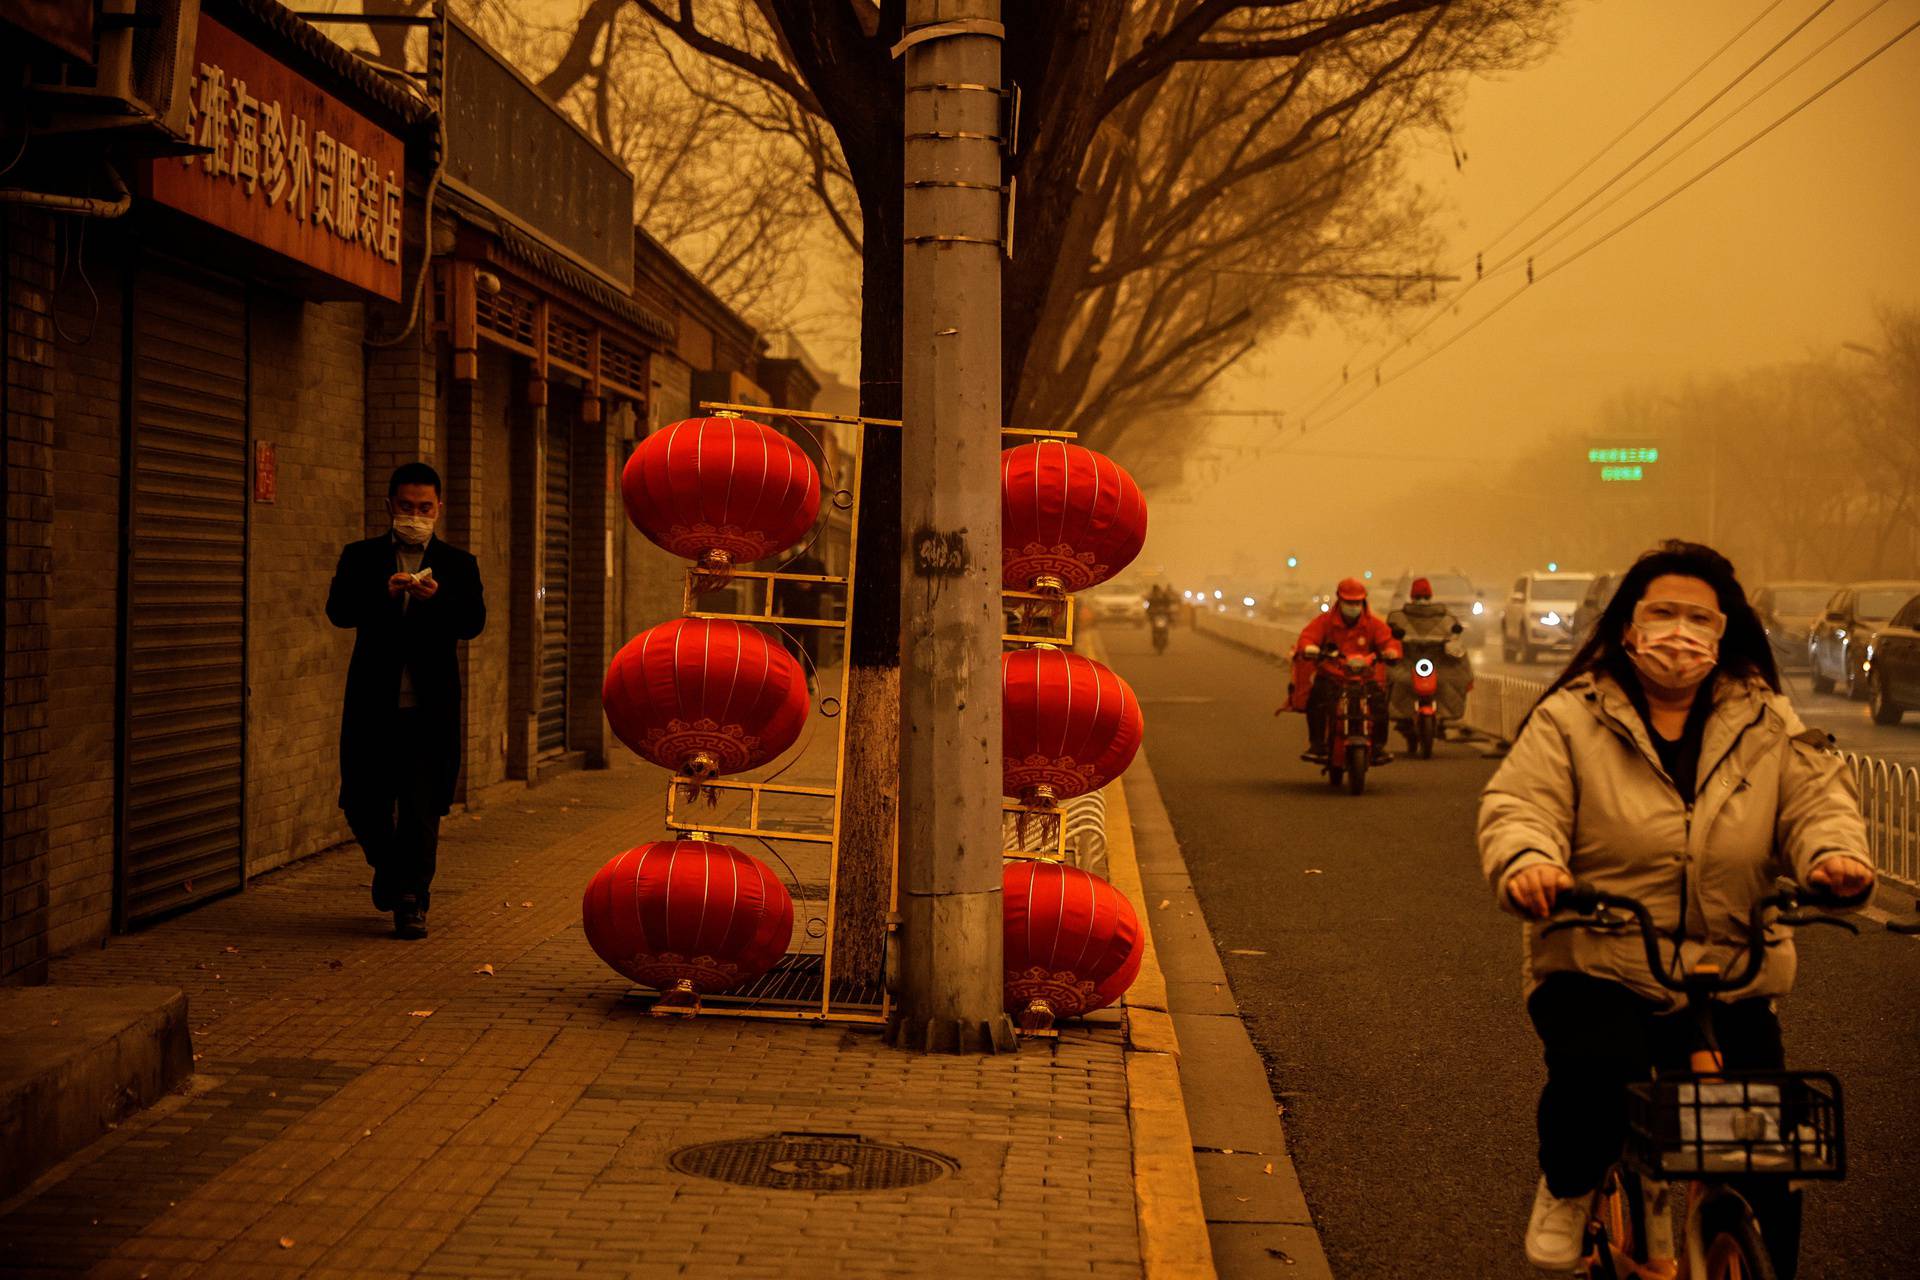 Sandstorm during morning rush hour in Beijing, China